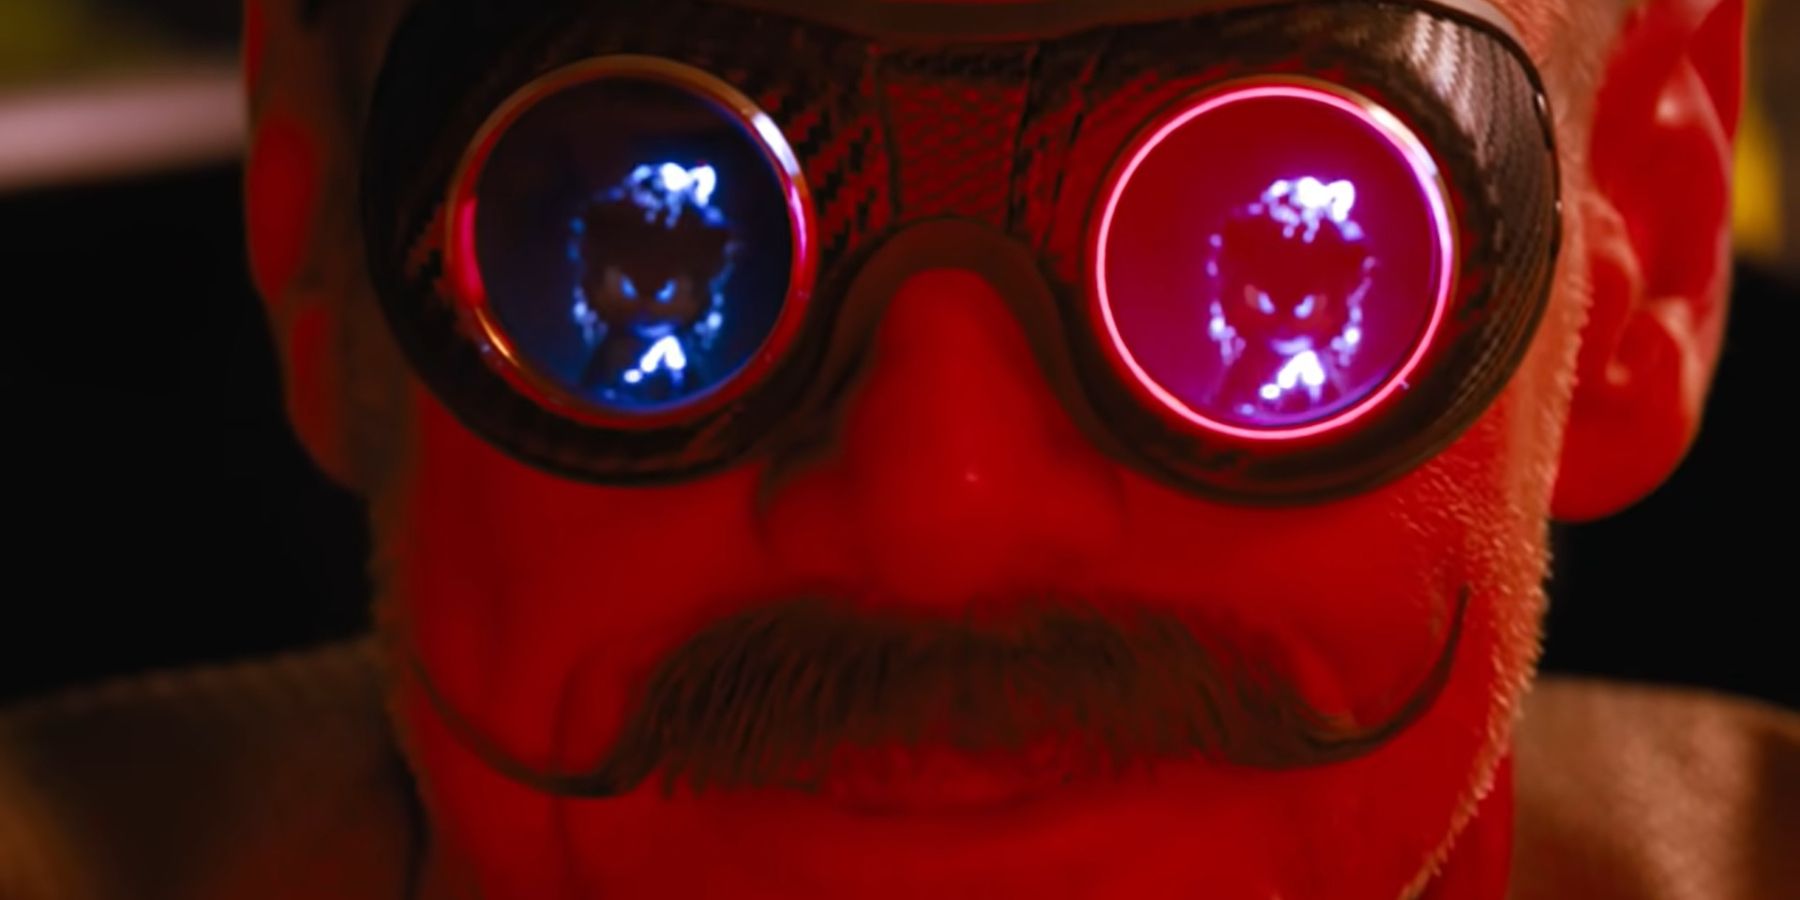 Dr Robotnik glaring at Sonic with Sonics reflection in the goggles in Sonic The Hedgehog